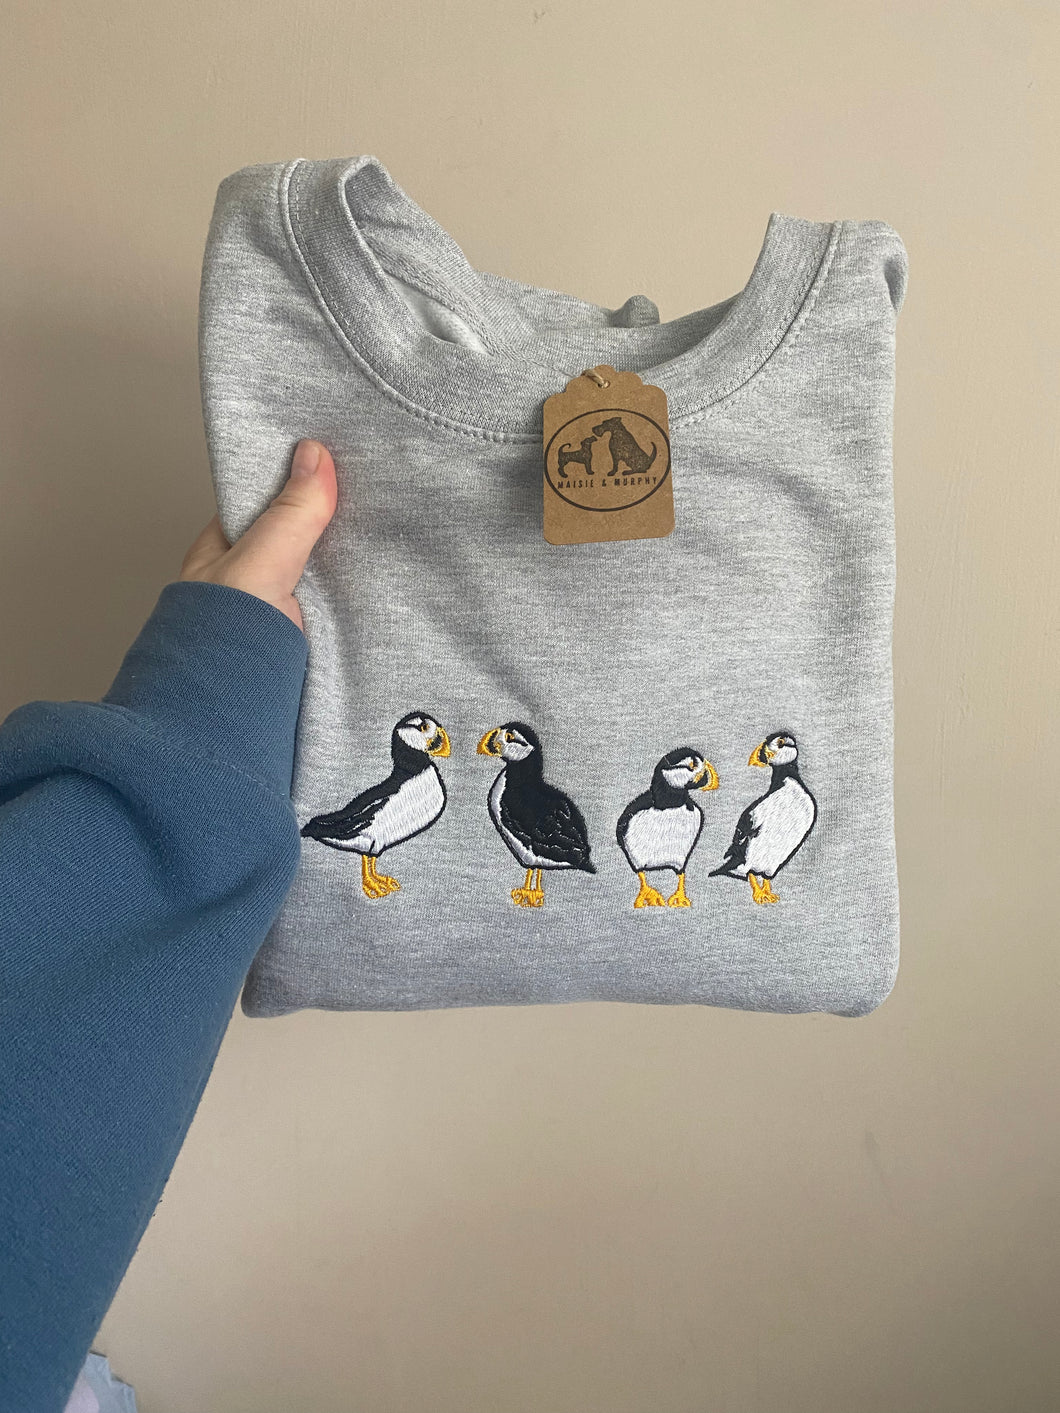 Puffin Embroidered Sweatshirt - Puffin gifts for puffin lovers.